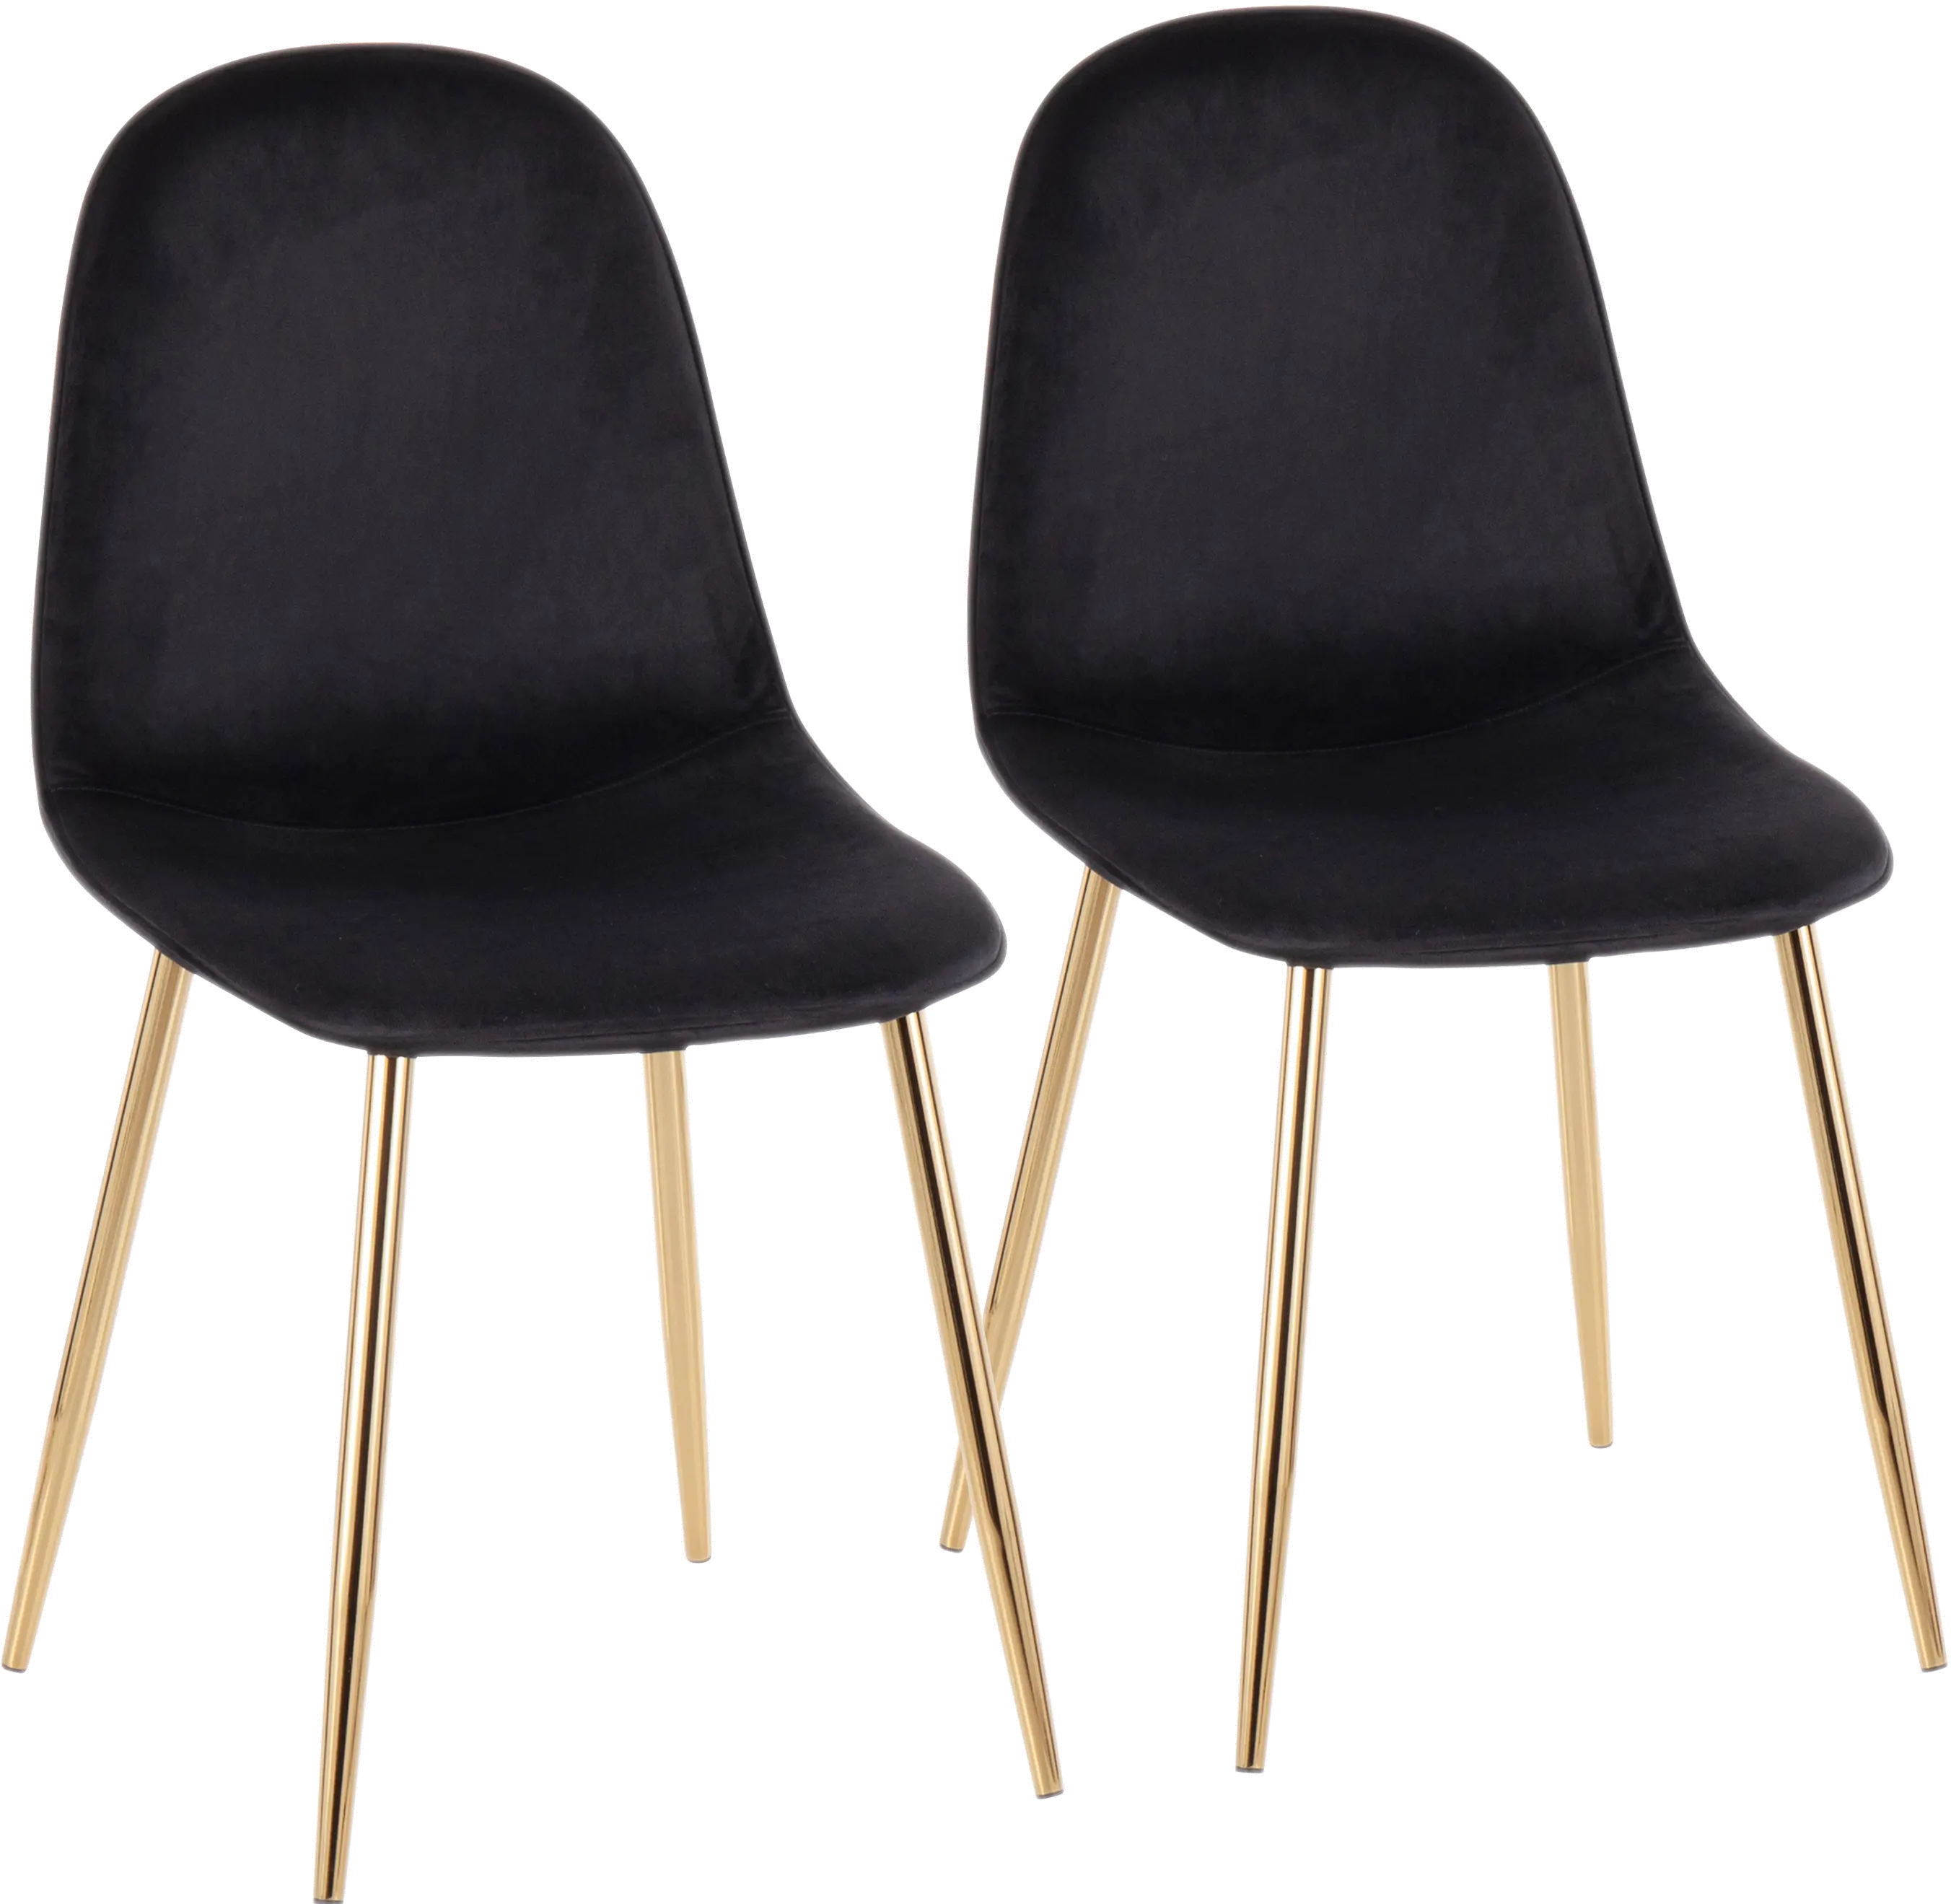 Contemporary Black and Gold Dining Room Chair (Set of 2) - Pebble